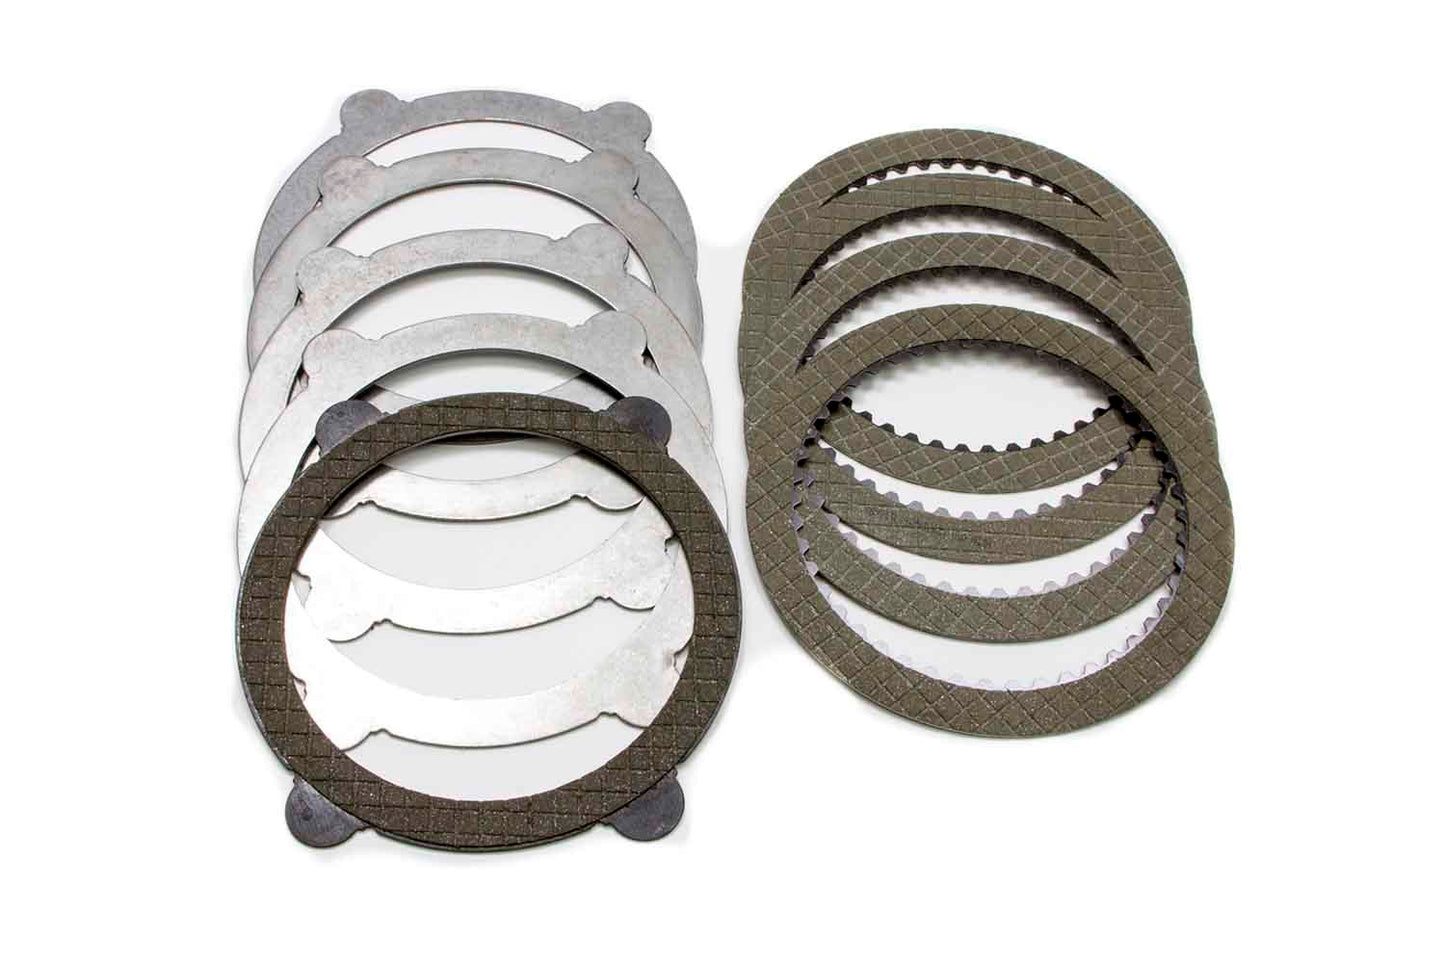 9in DIFFERENTIAL LSD CLUTCH KIT - 9 PIECE